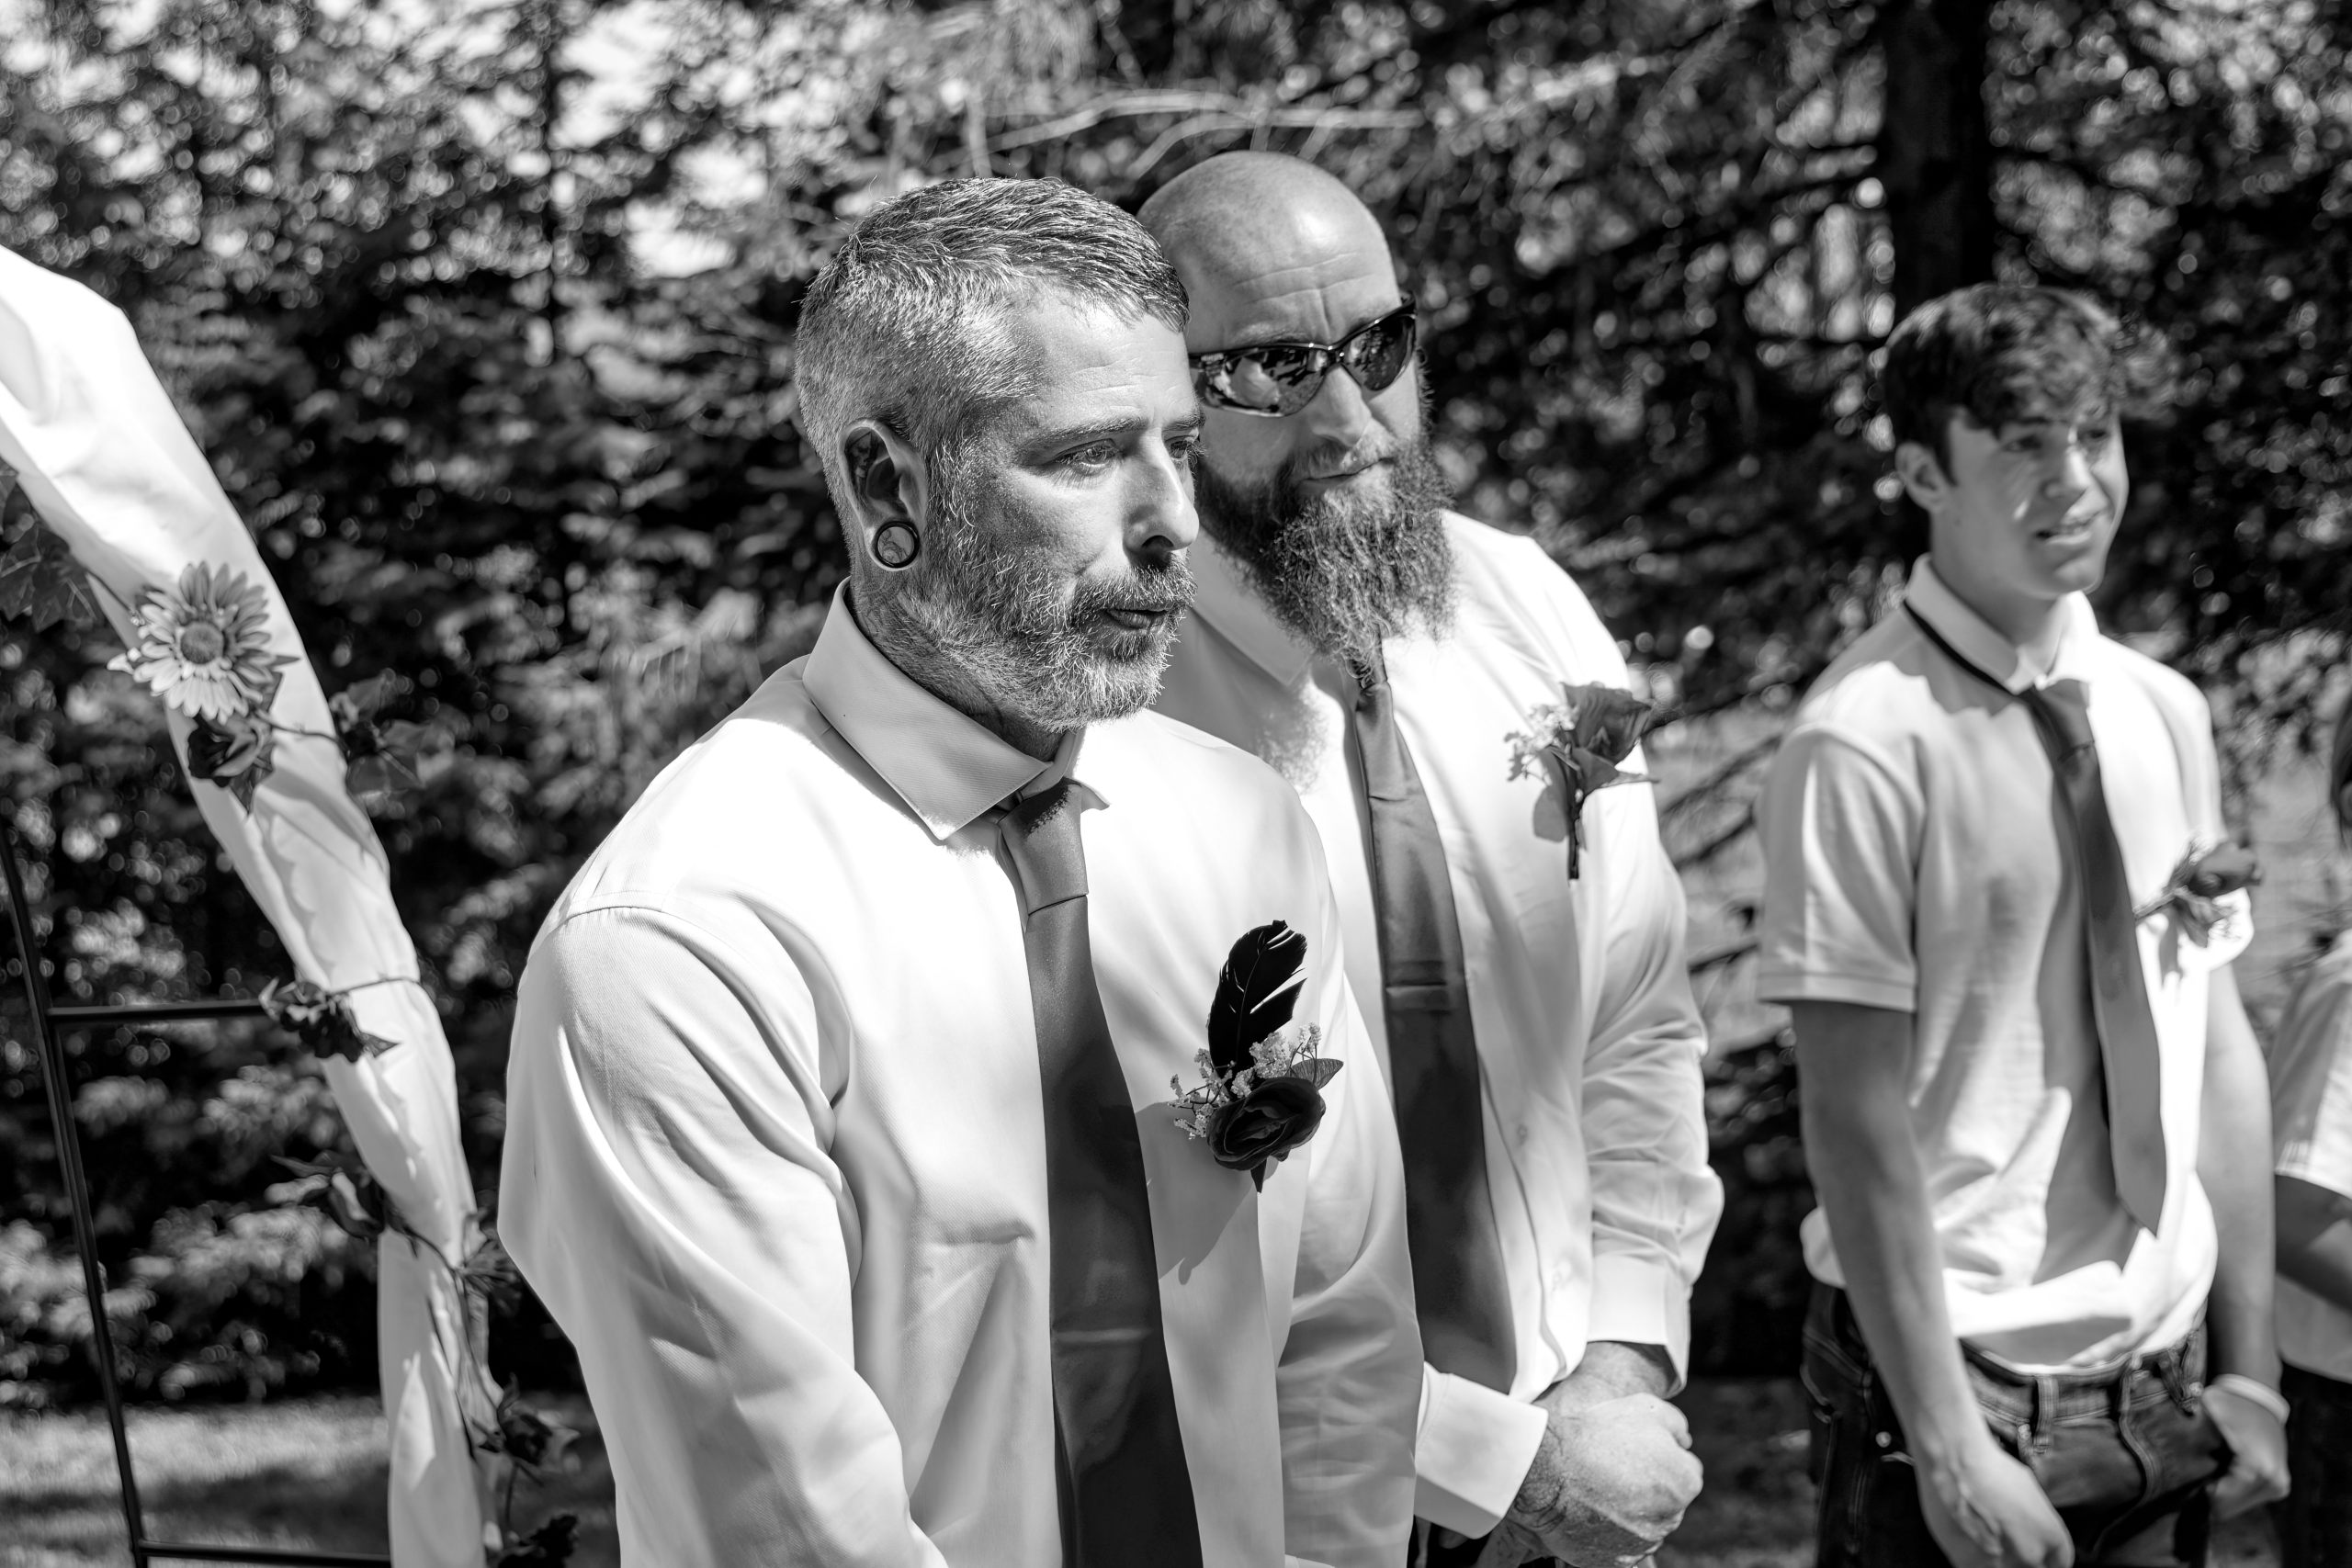 A groom at a Muskoka wedding in Awe of his Approaching Bride